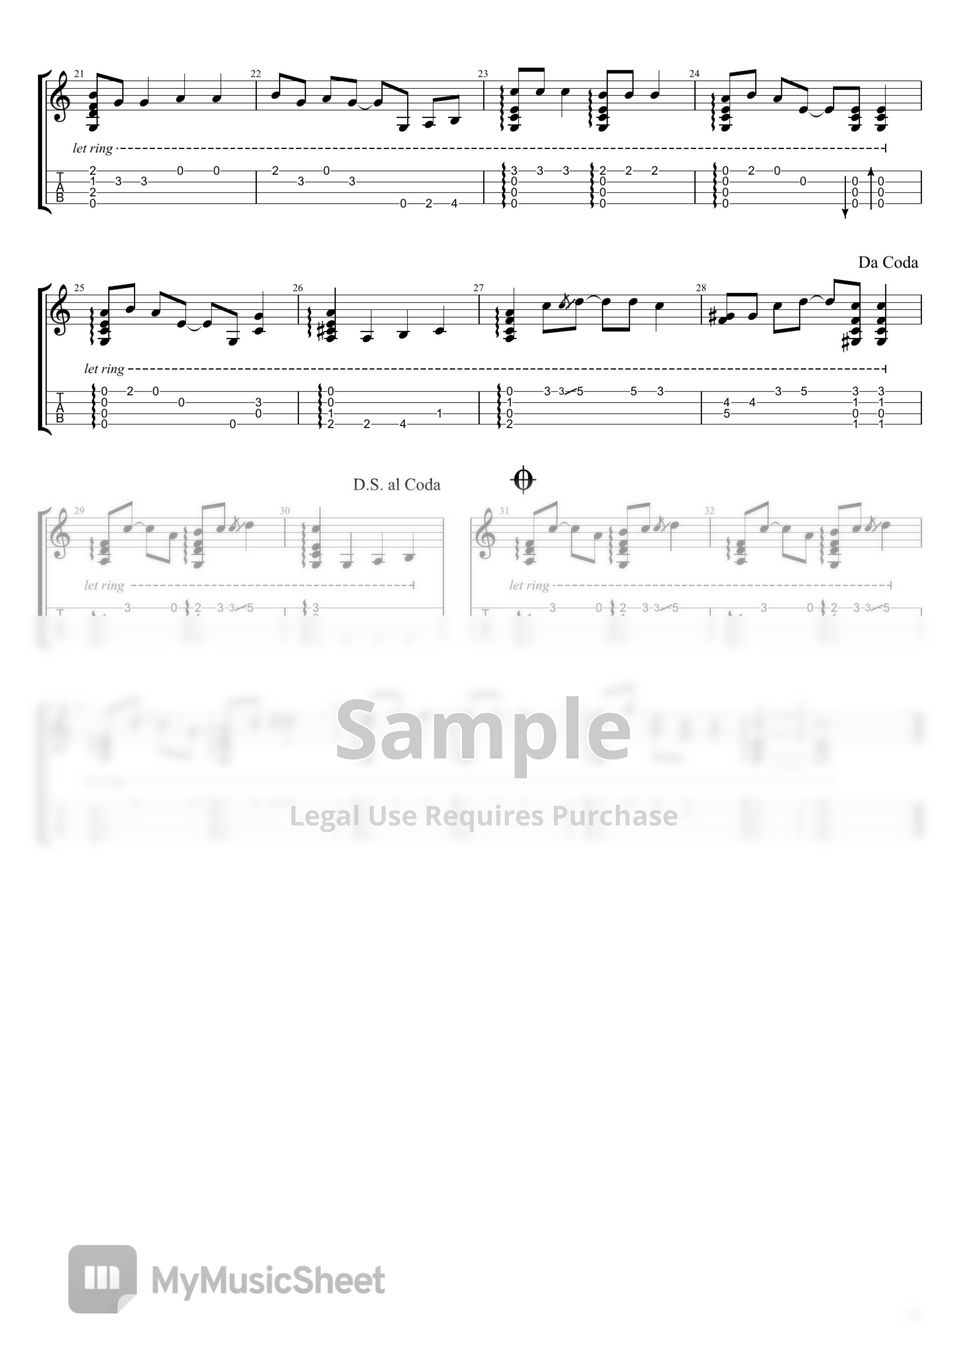 Christmas Carol - "Jingle Bell Rock" Easy Finger Style Tab for Ukulele (Low G tuning) by EMST